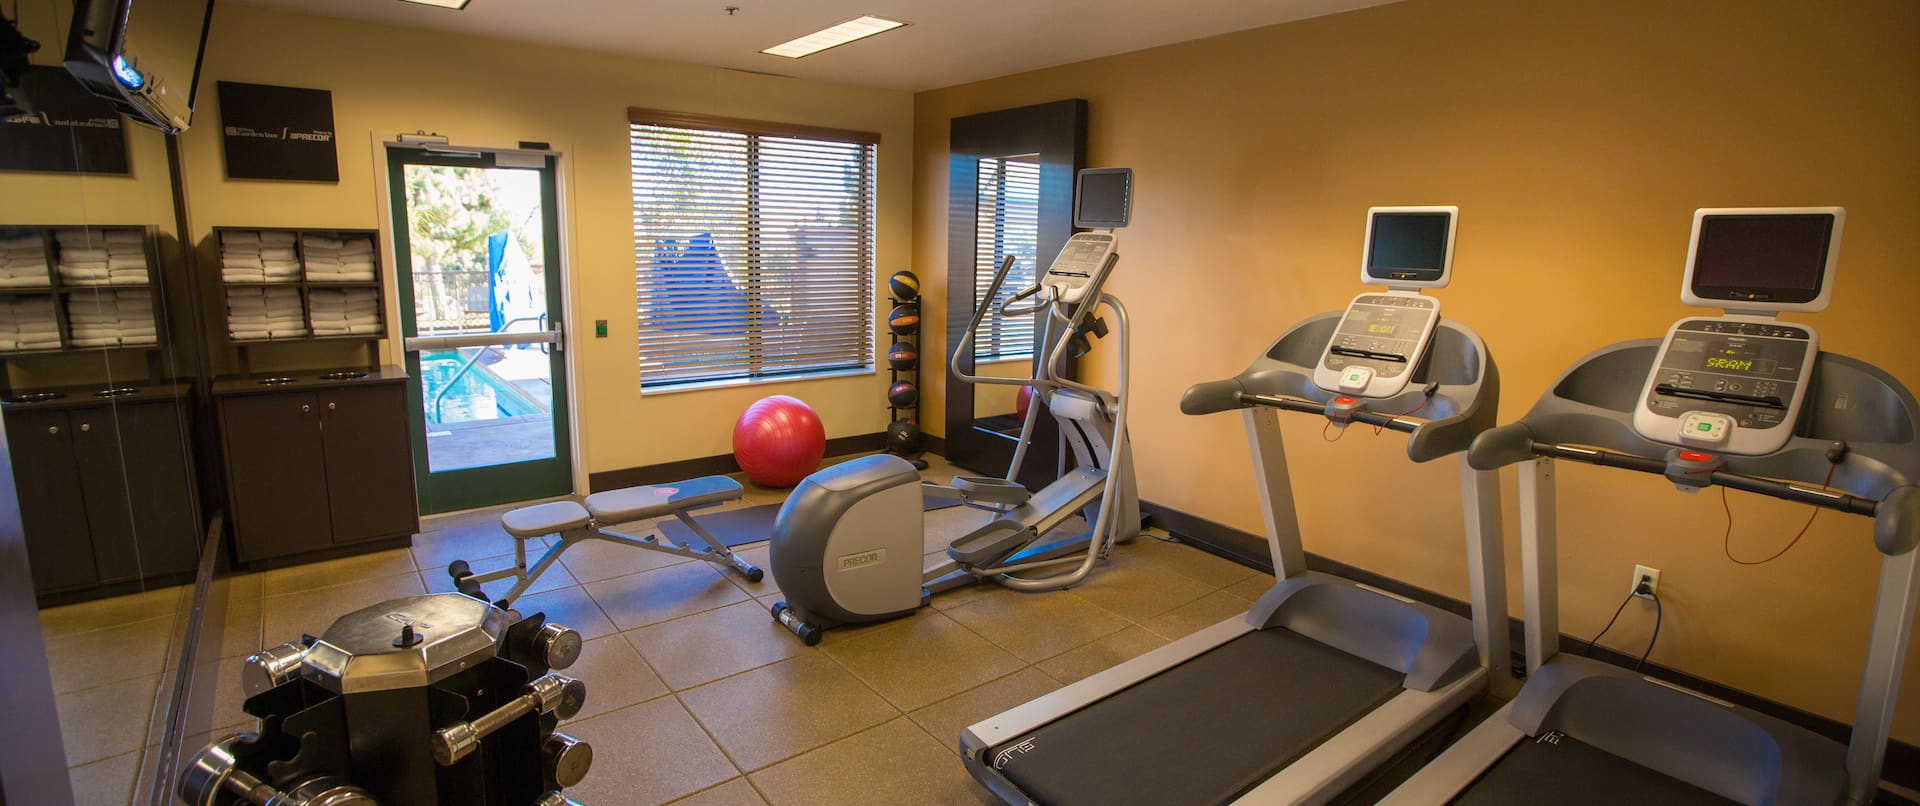 Fitness Center With Cardio Equipment, Free Weights, TV, Towel Station, Weight Bench, Exercise Ball, Weight Balls, and Mirror